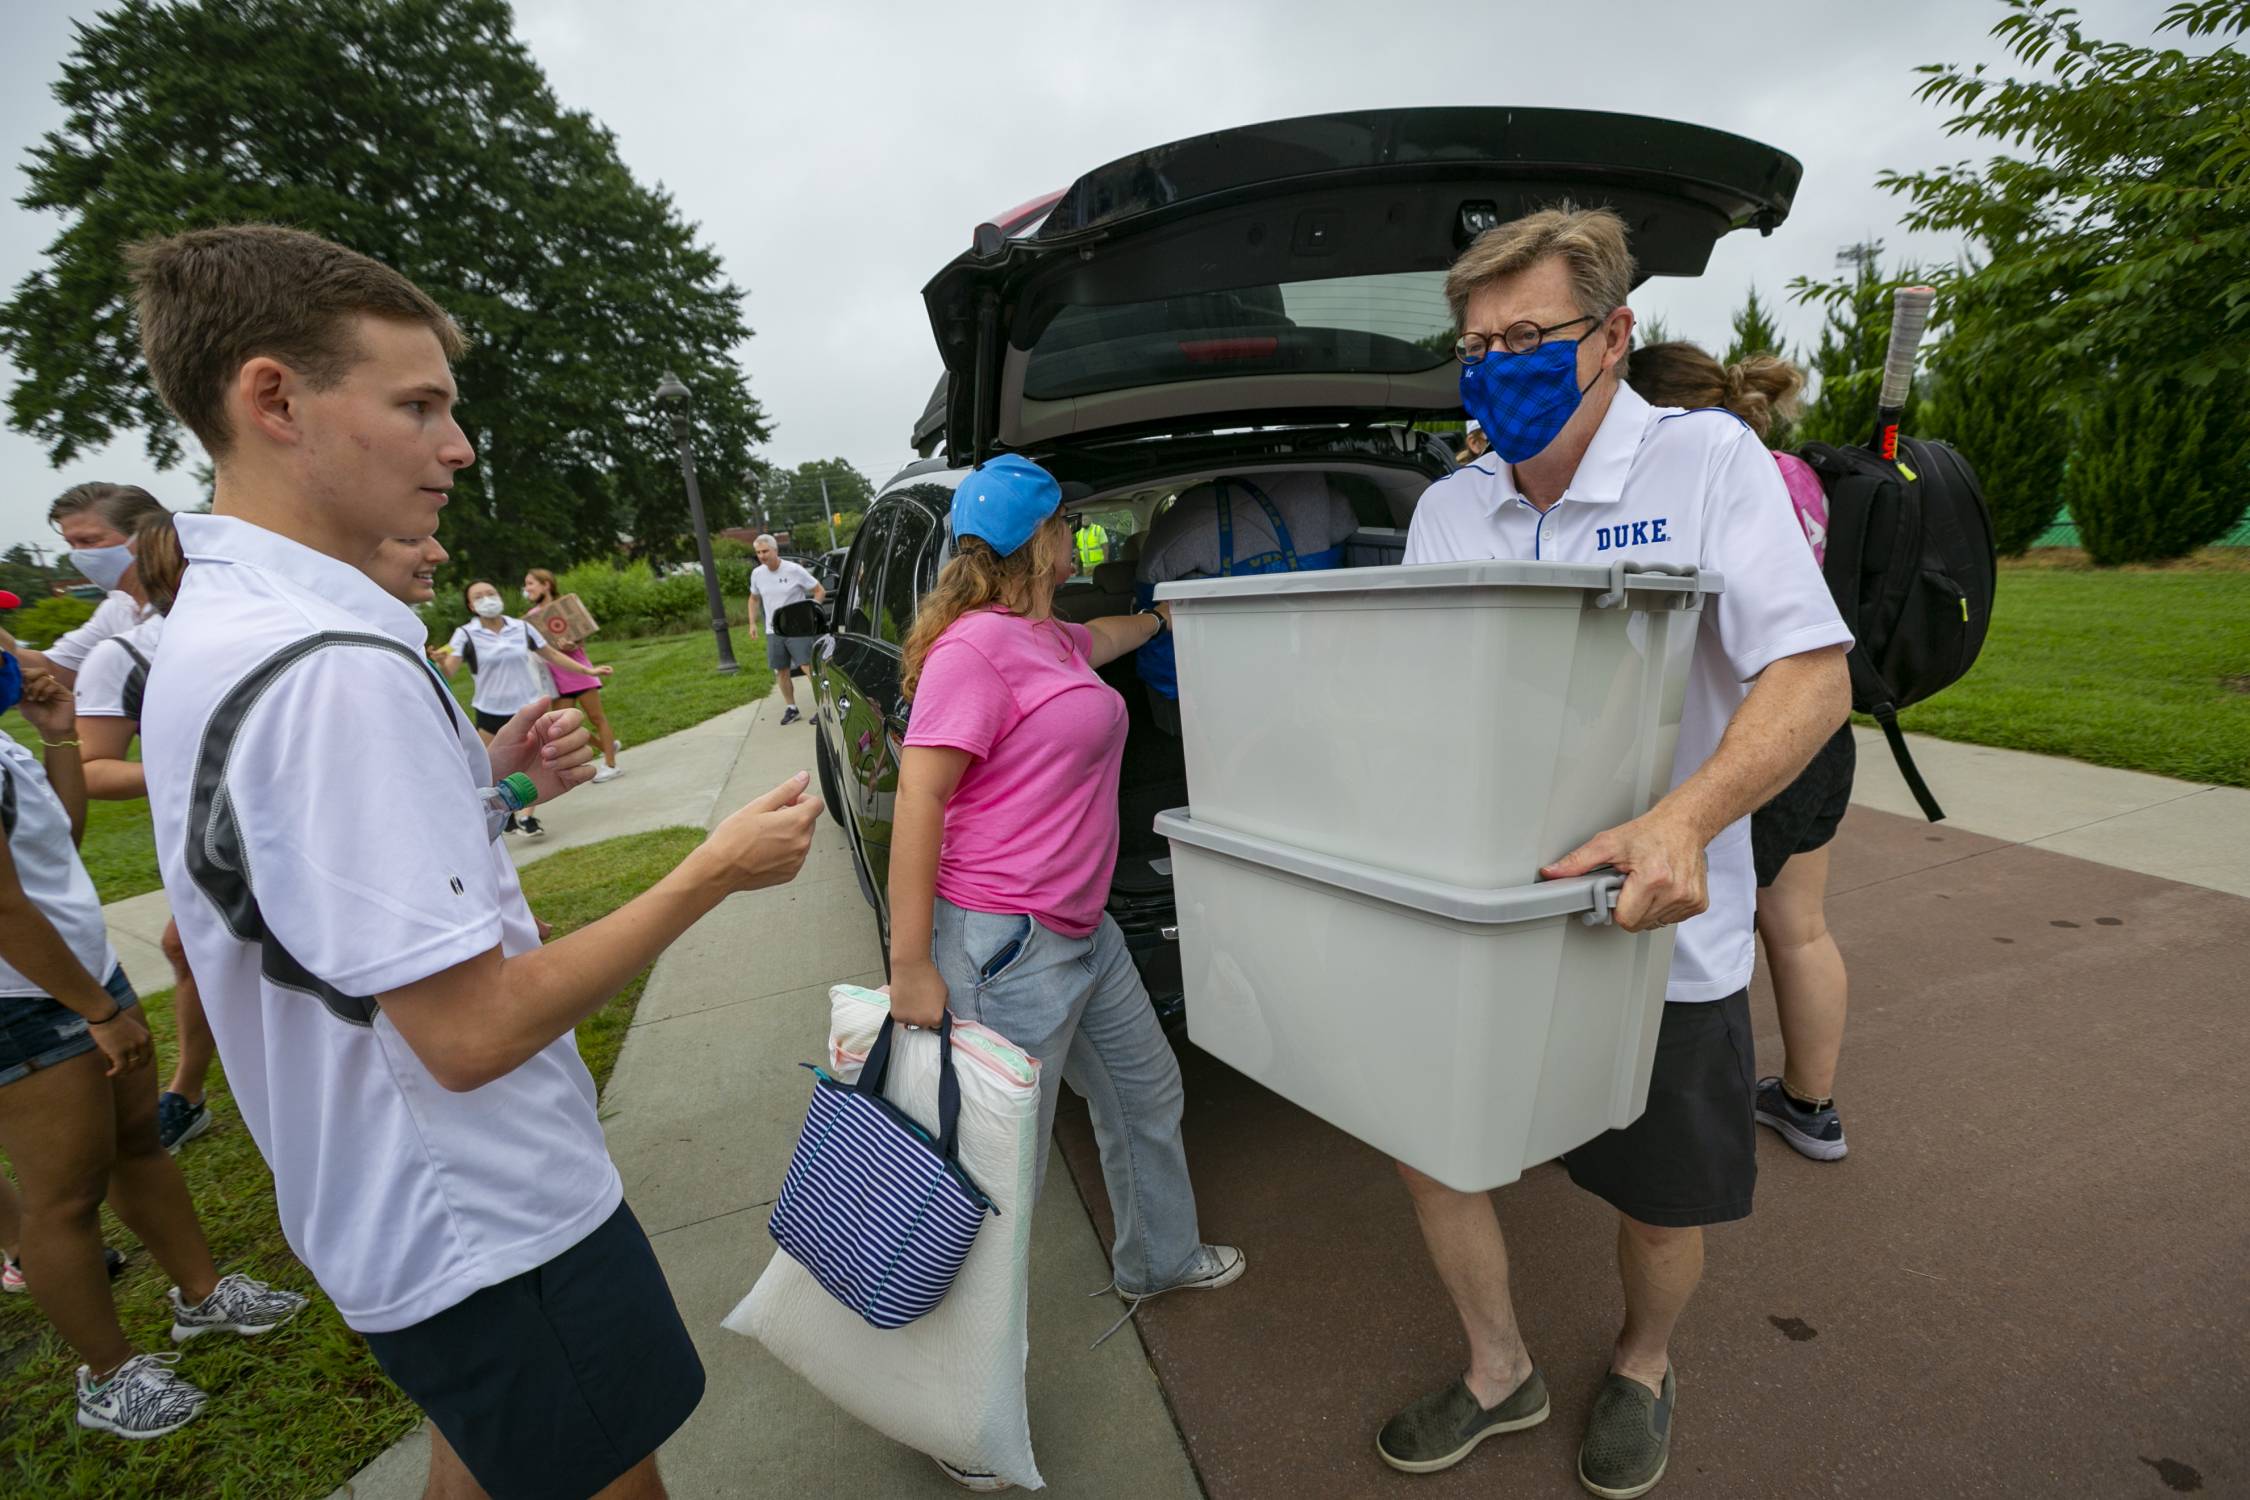 Duke University President Vincent Price, right, helps with move-in activities during move-in day on Duke’s East campus. 